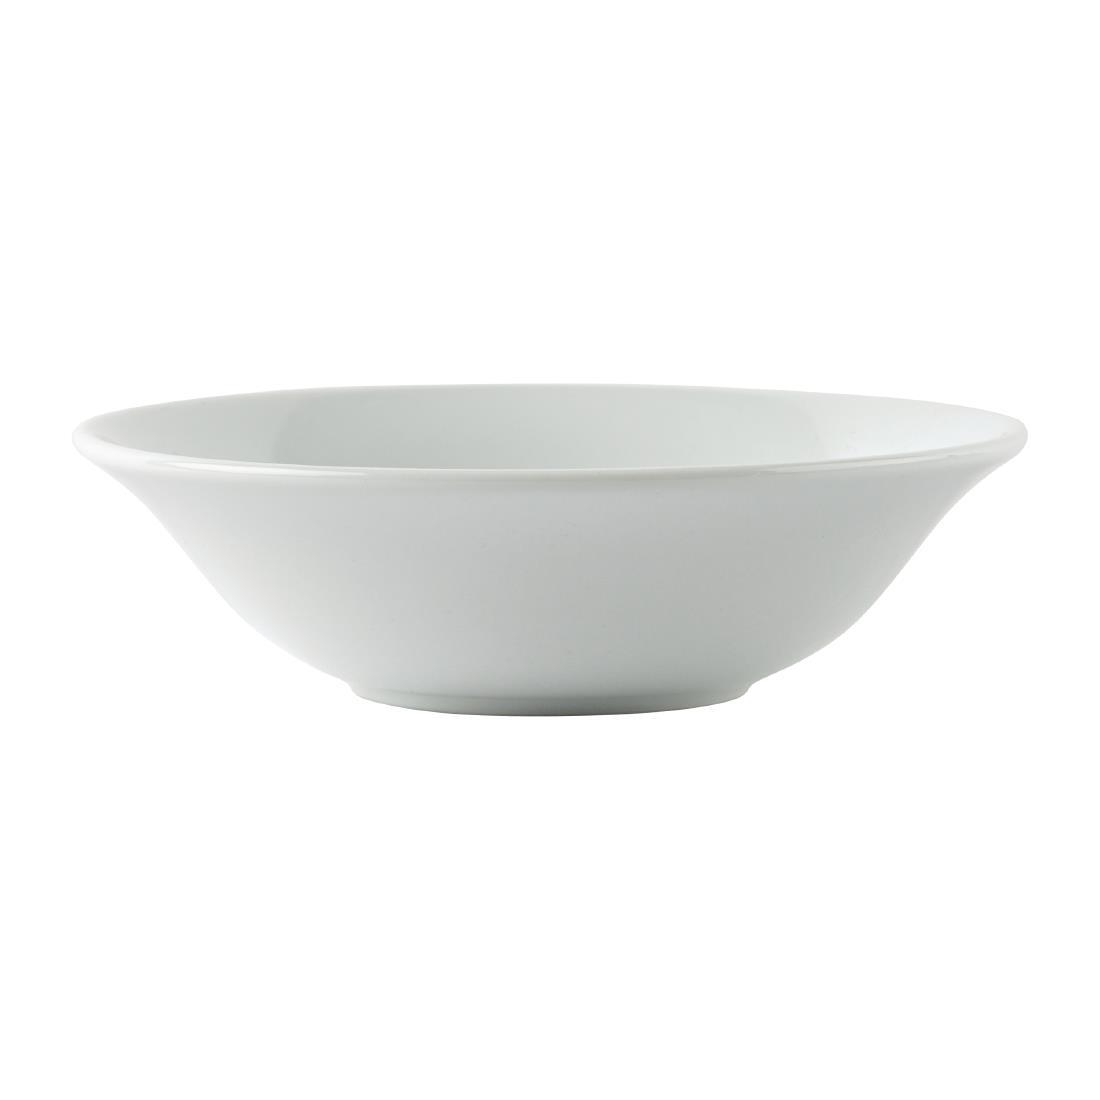 Olympia Athena Oatmeal Bowls 153mm (Pack of 12) - CC213  - 5